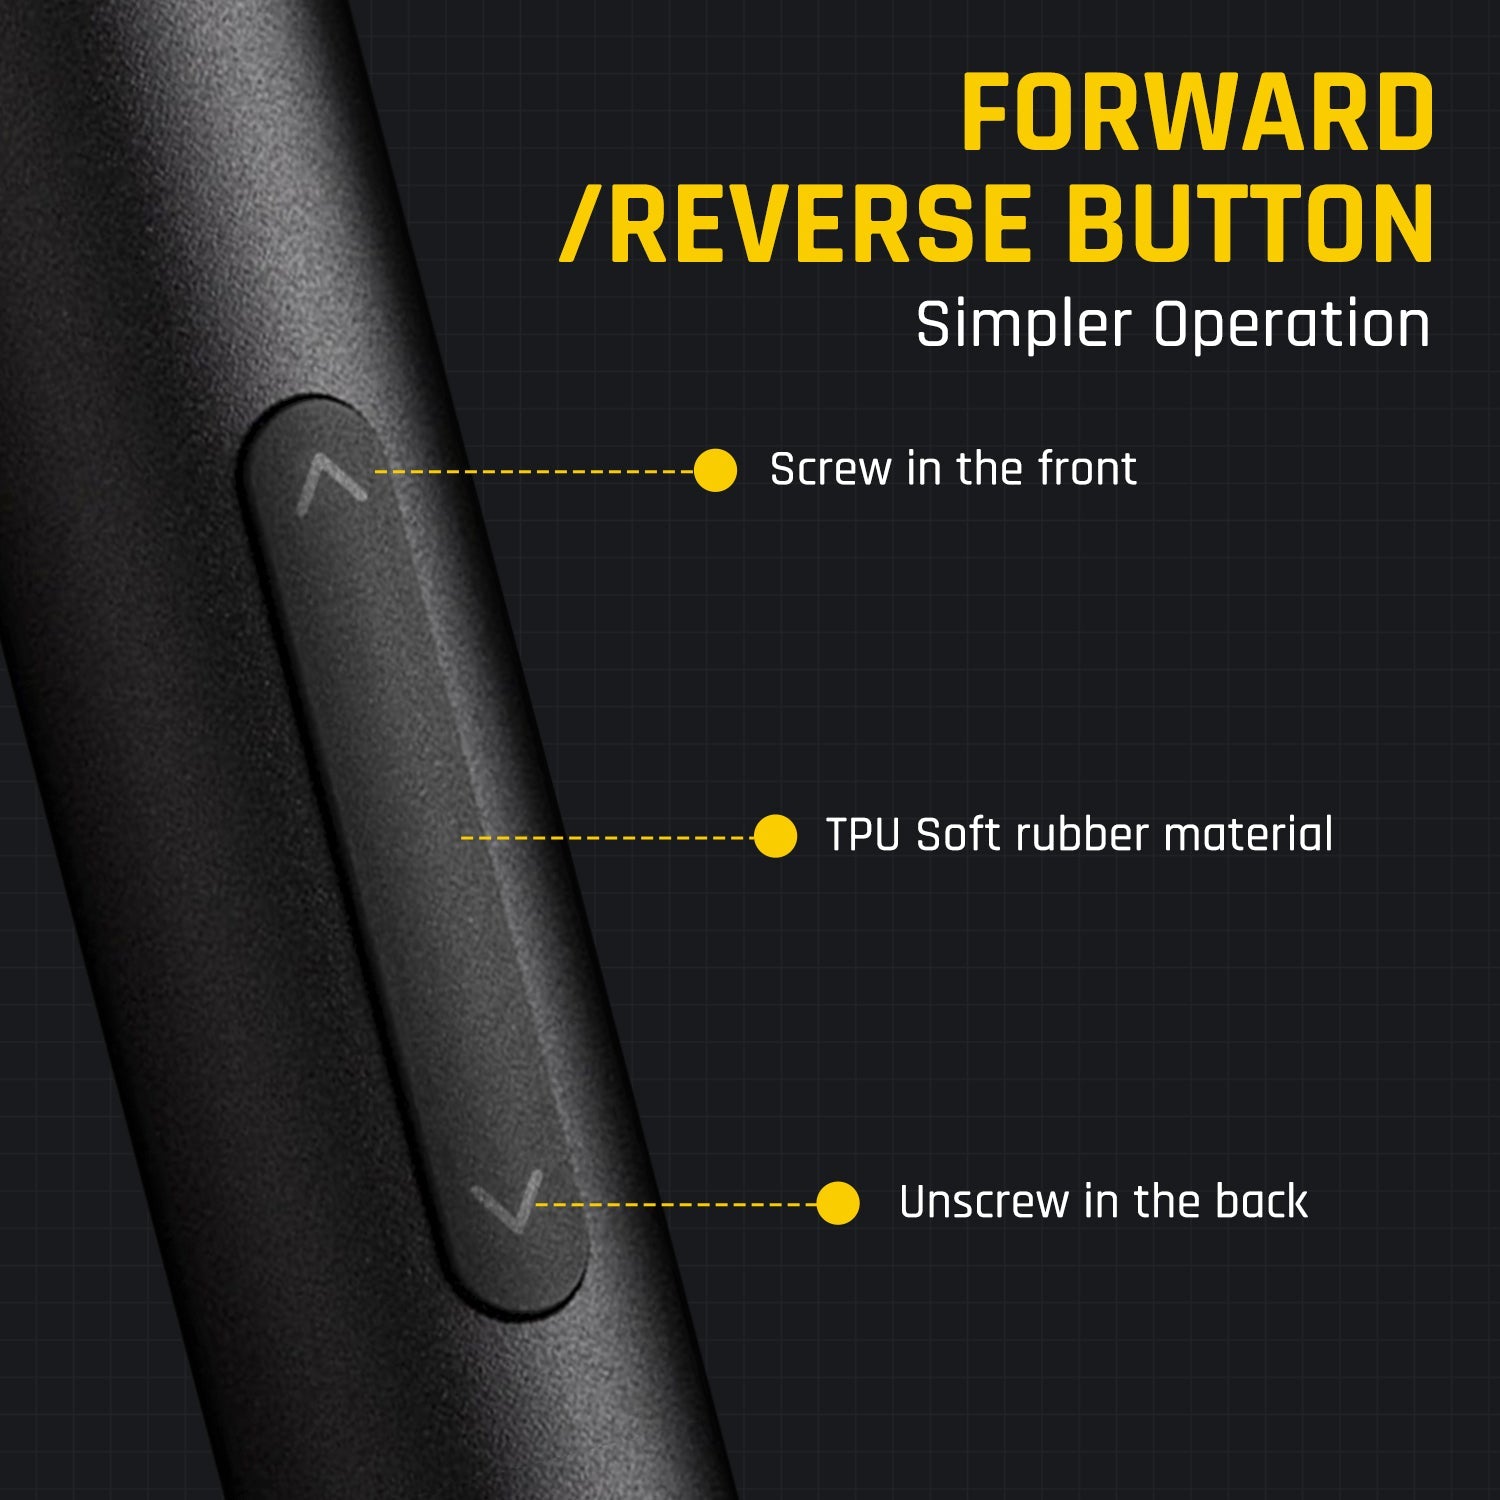 This Electric Screwdriver has forward/reverse button which provides simpler operation